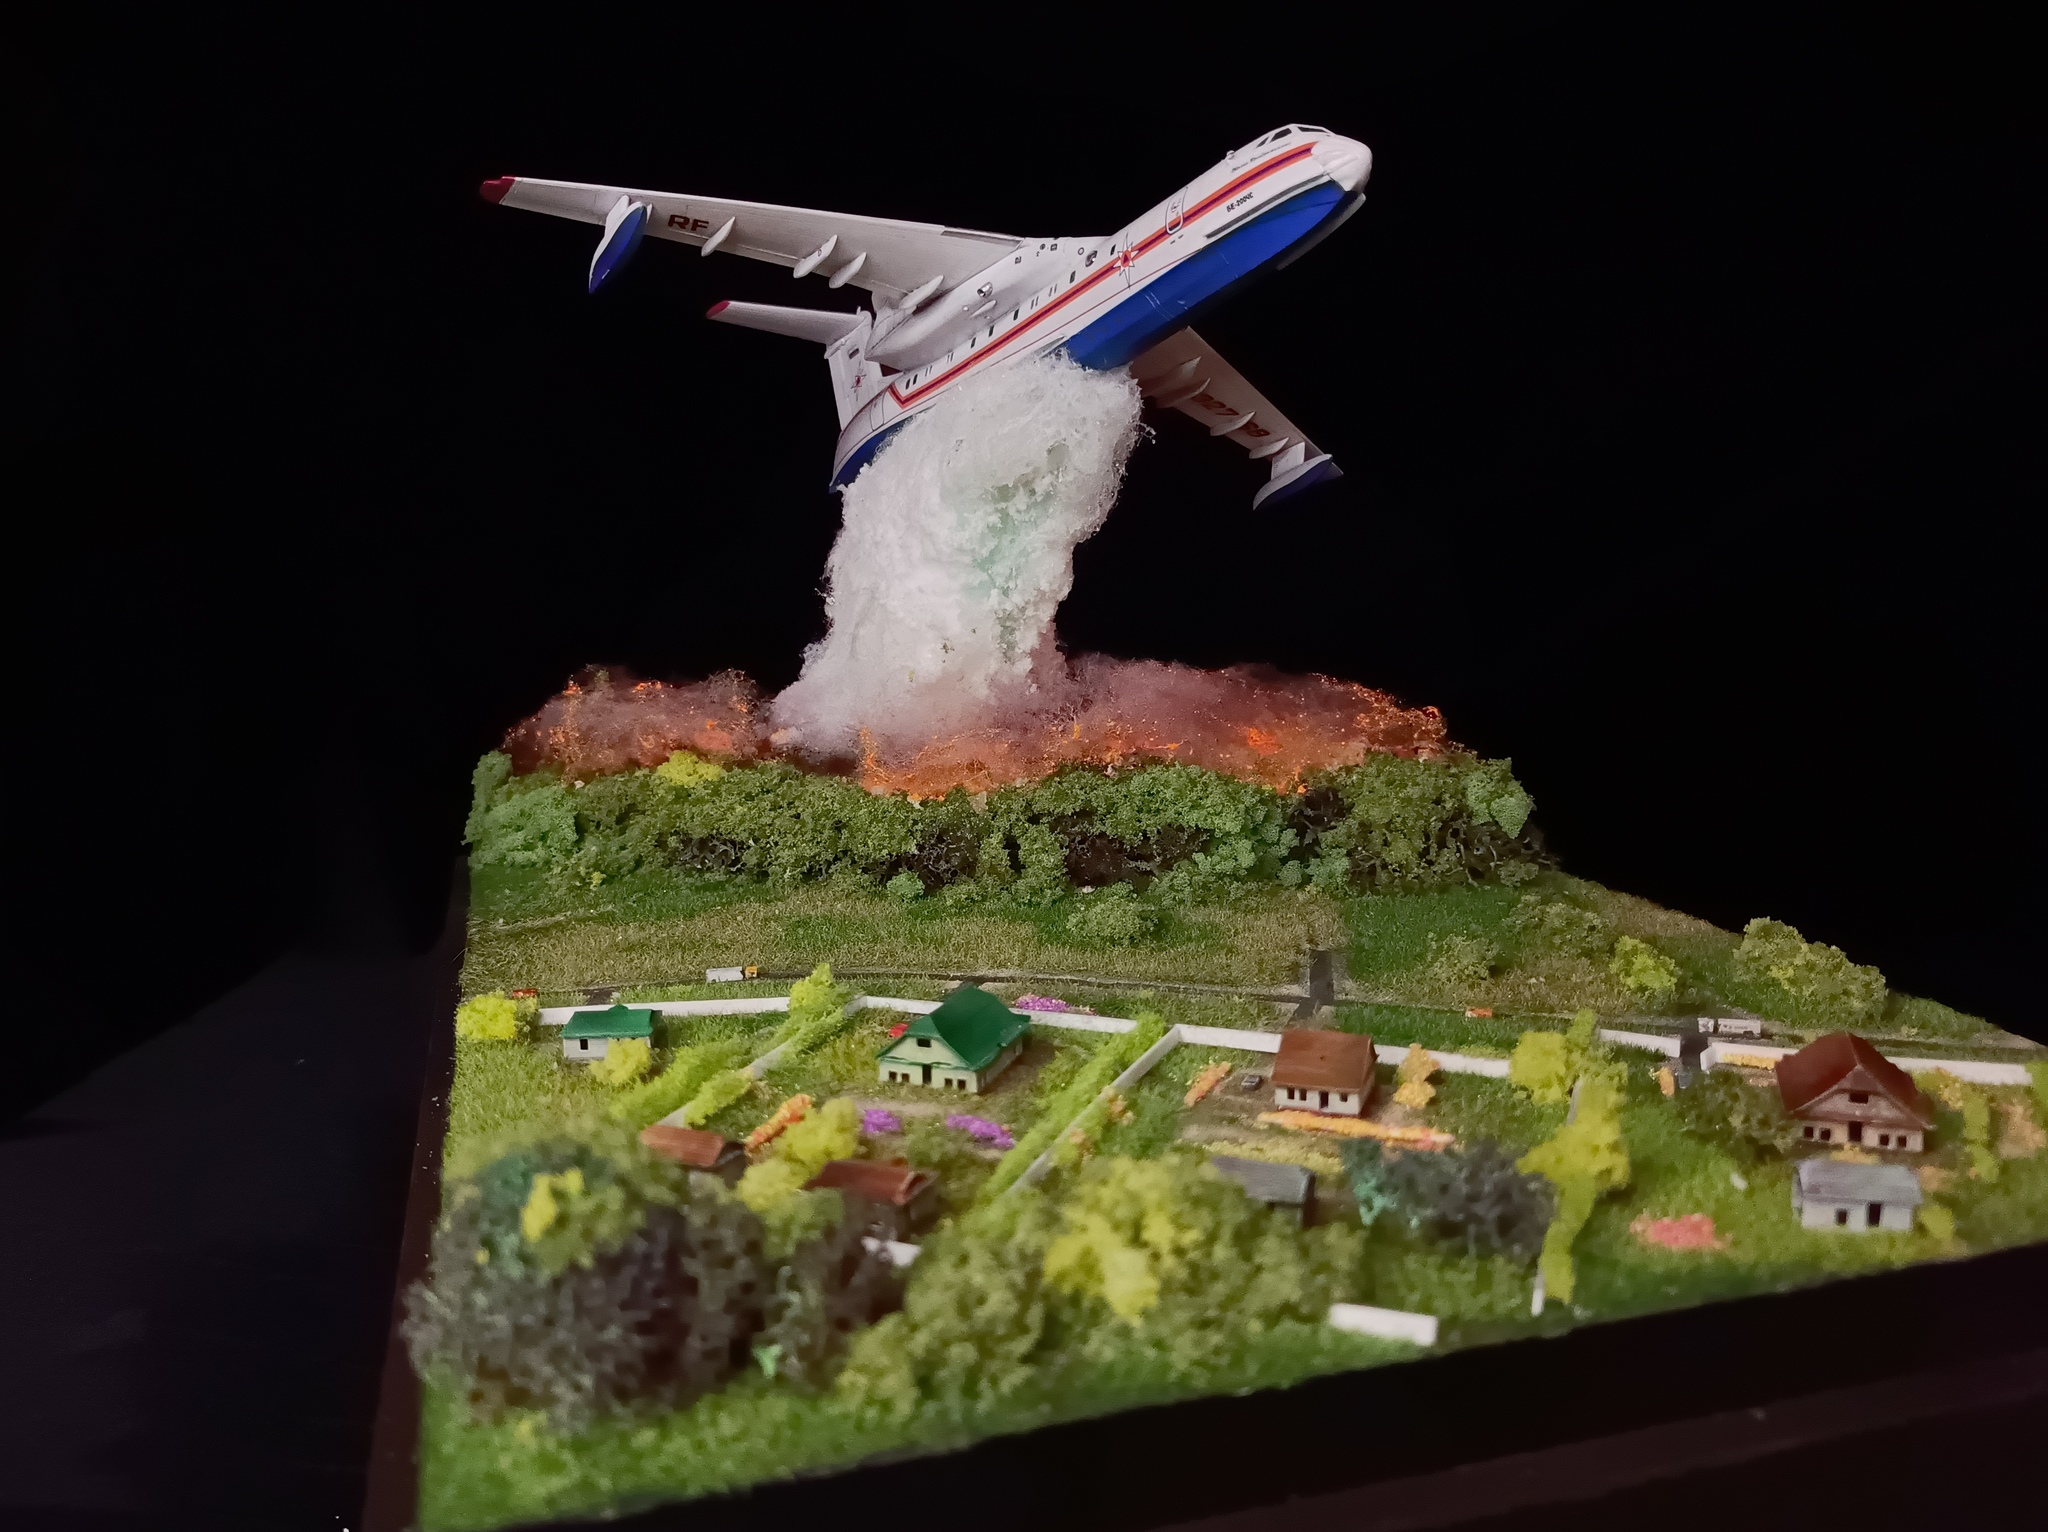 Master of his craft! - My, Diorama, Modeling, Stand modeling, Aviation, , Be-200, Fire, Ministry of Emergency Situations, , Presents, Interior, Games, Navy, Epoxy resin, Longpost